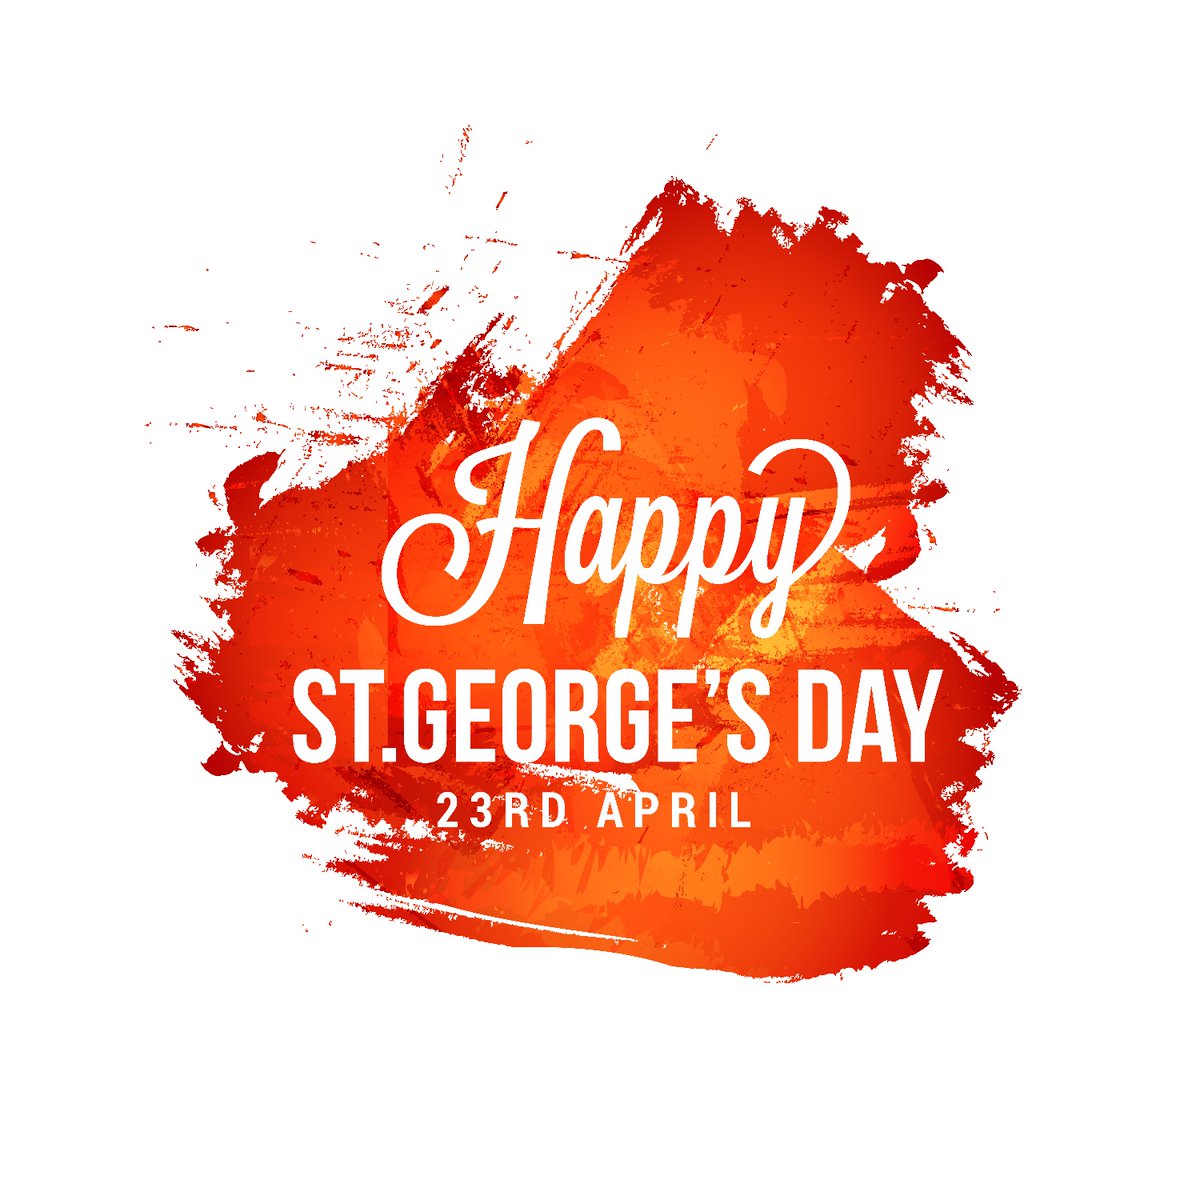 We wish all our members, colleagues and friends in England a very happy St George's Day!